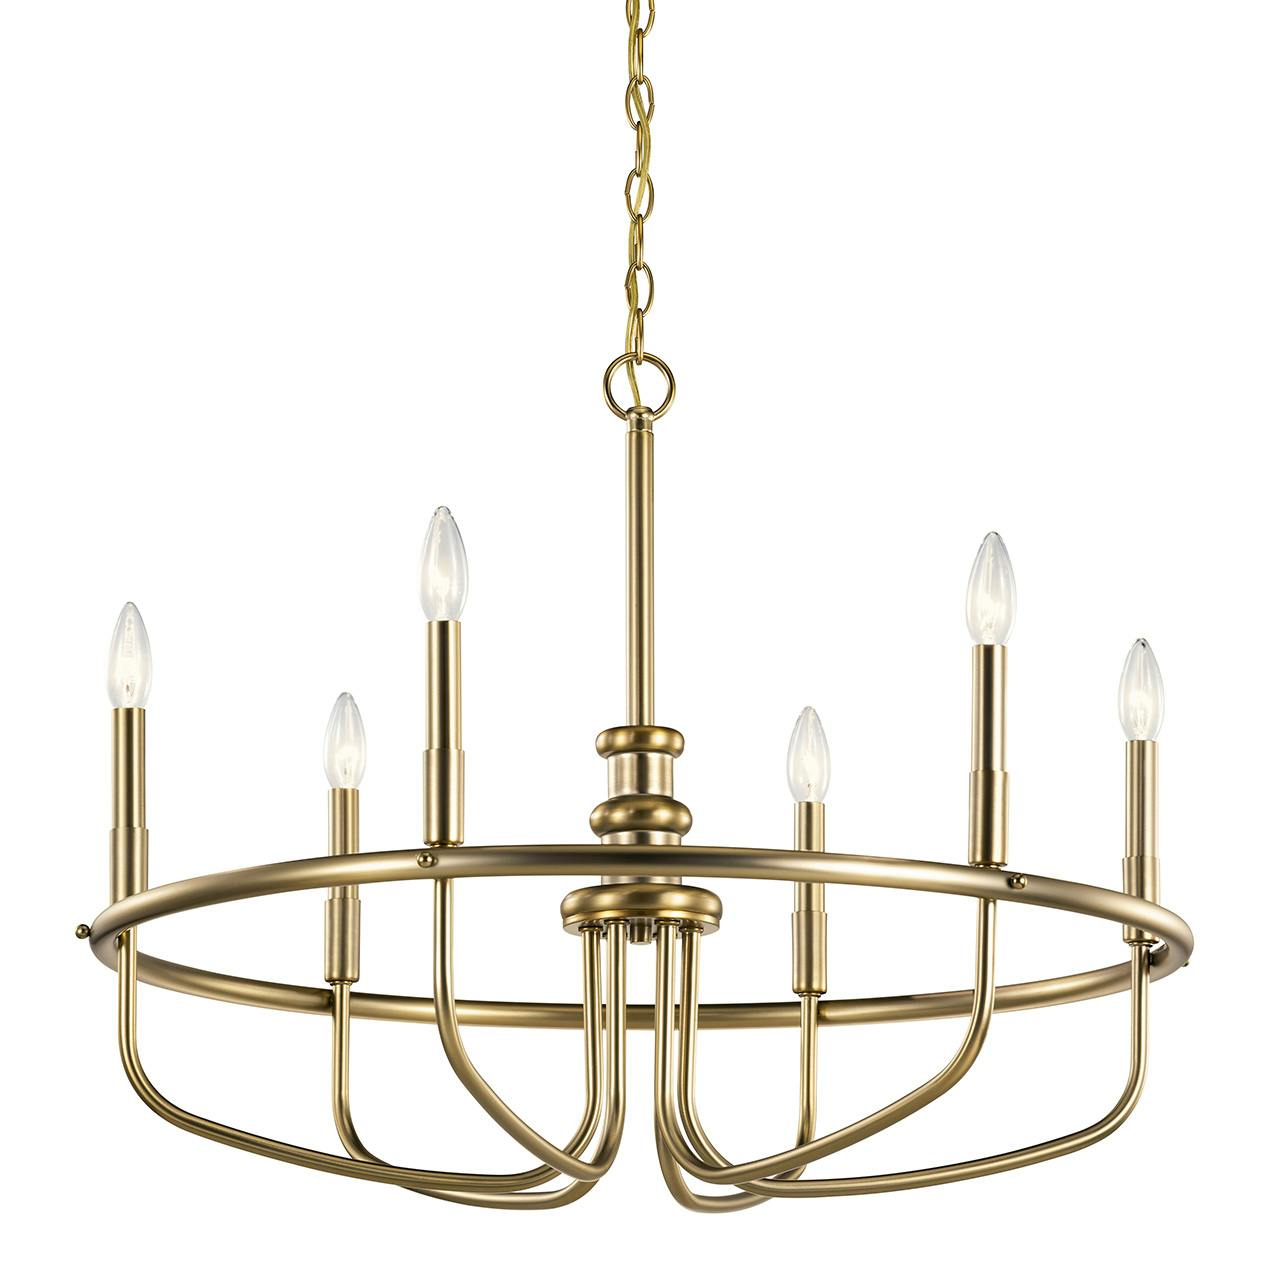 Capitol Hill 22" Chandelier Bronze without the canopy on a white background